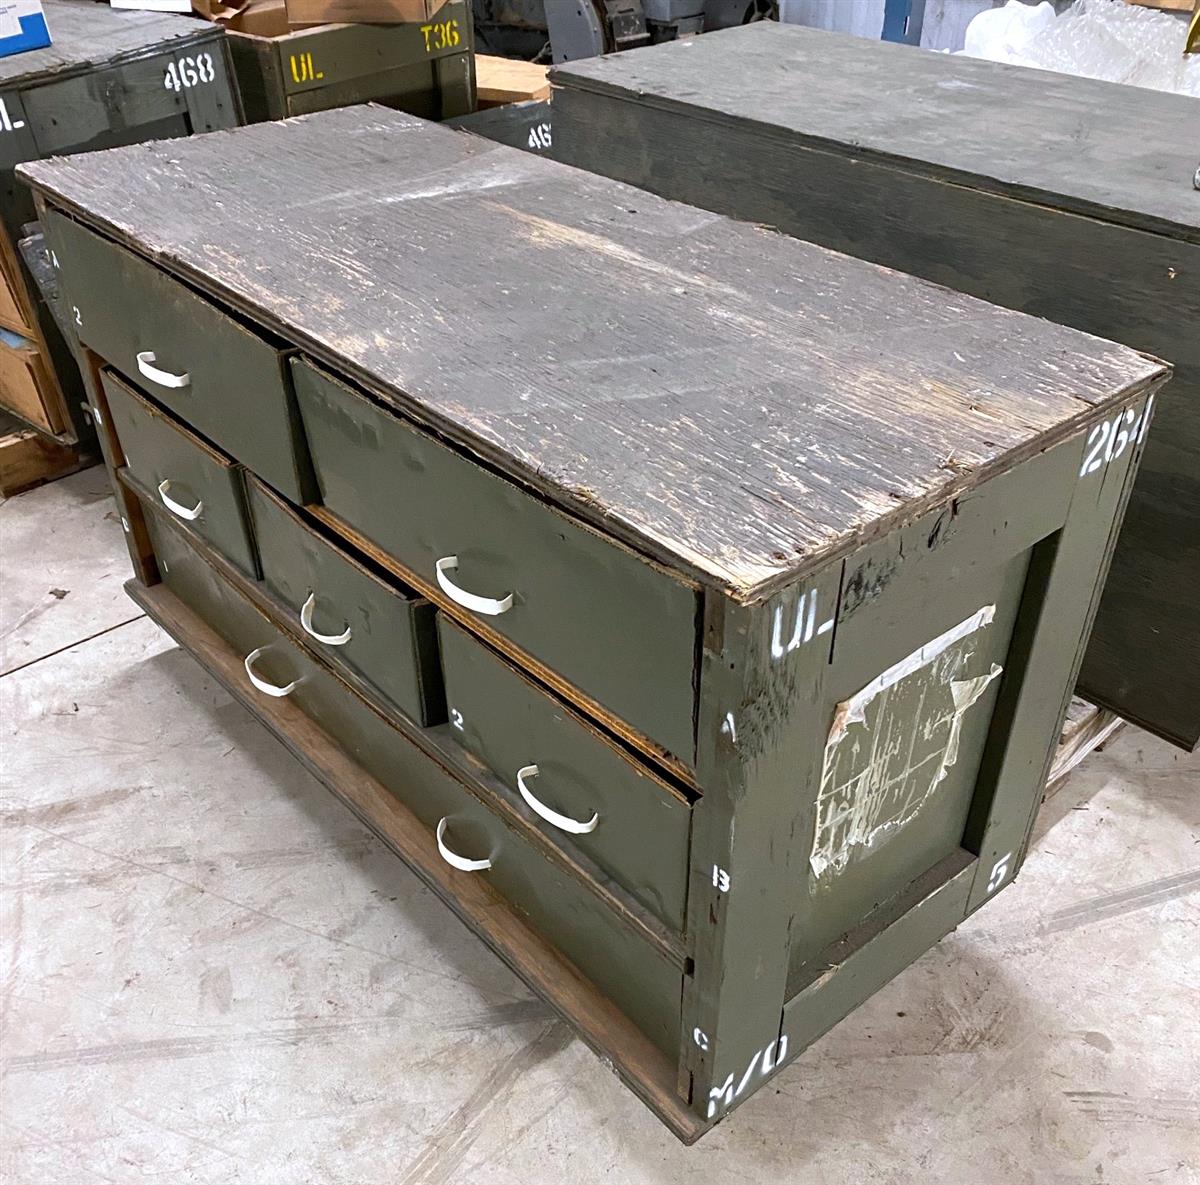 SP-2659 | SP-2659 Military Wooden Parts Chest With Drawers (5).jpg